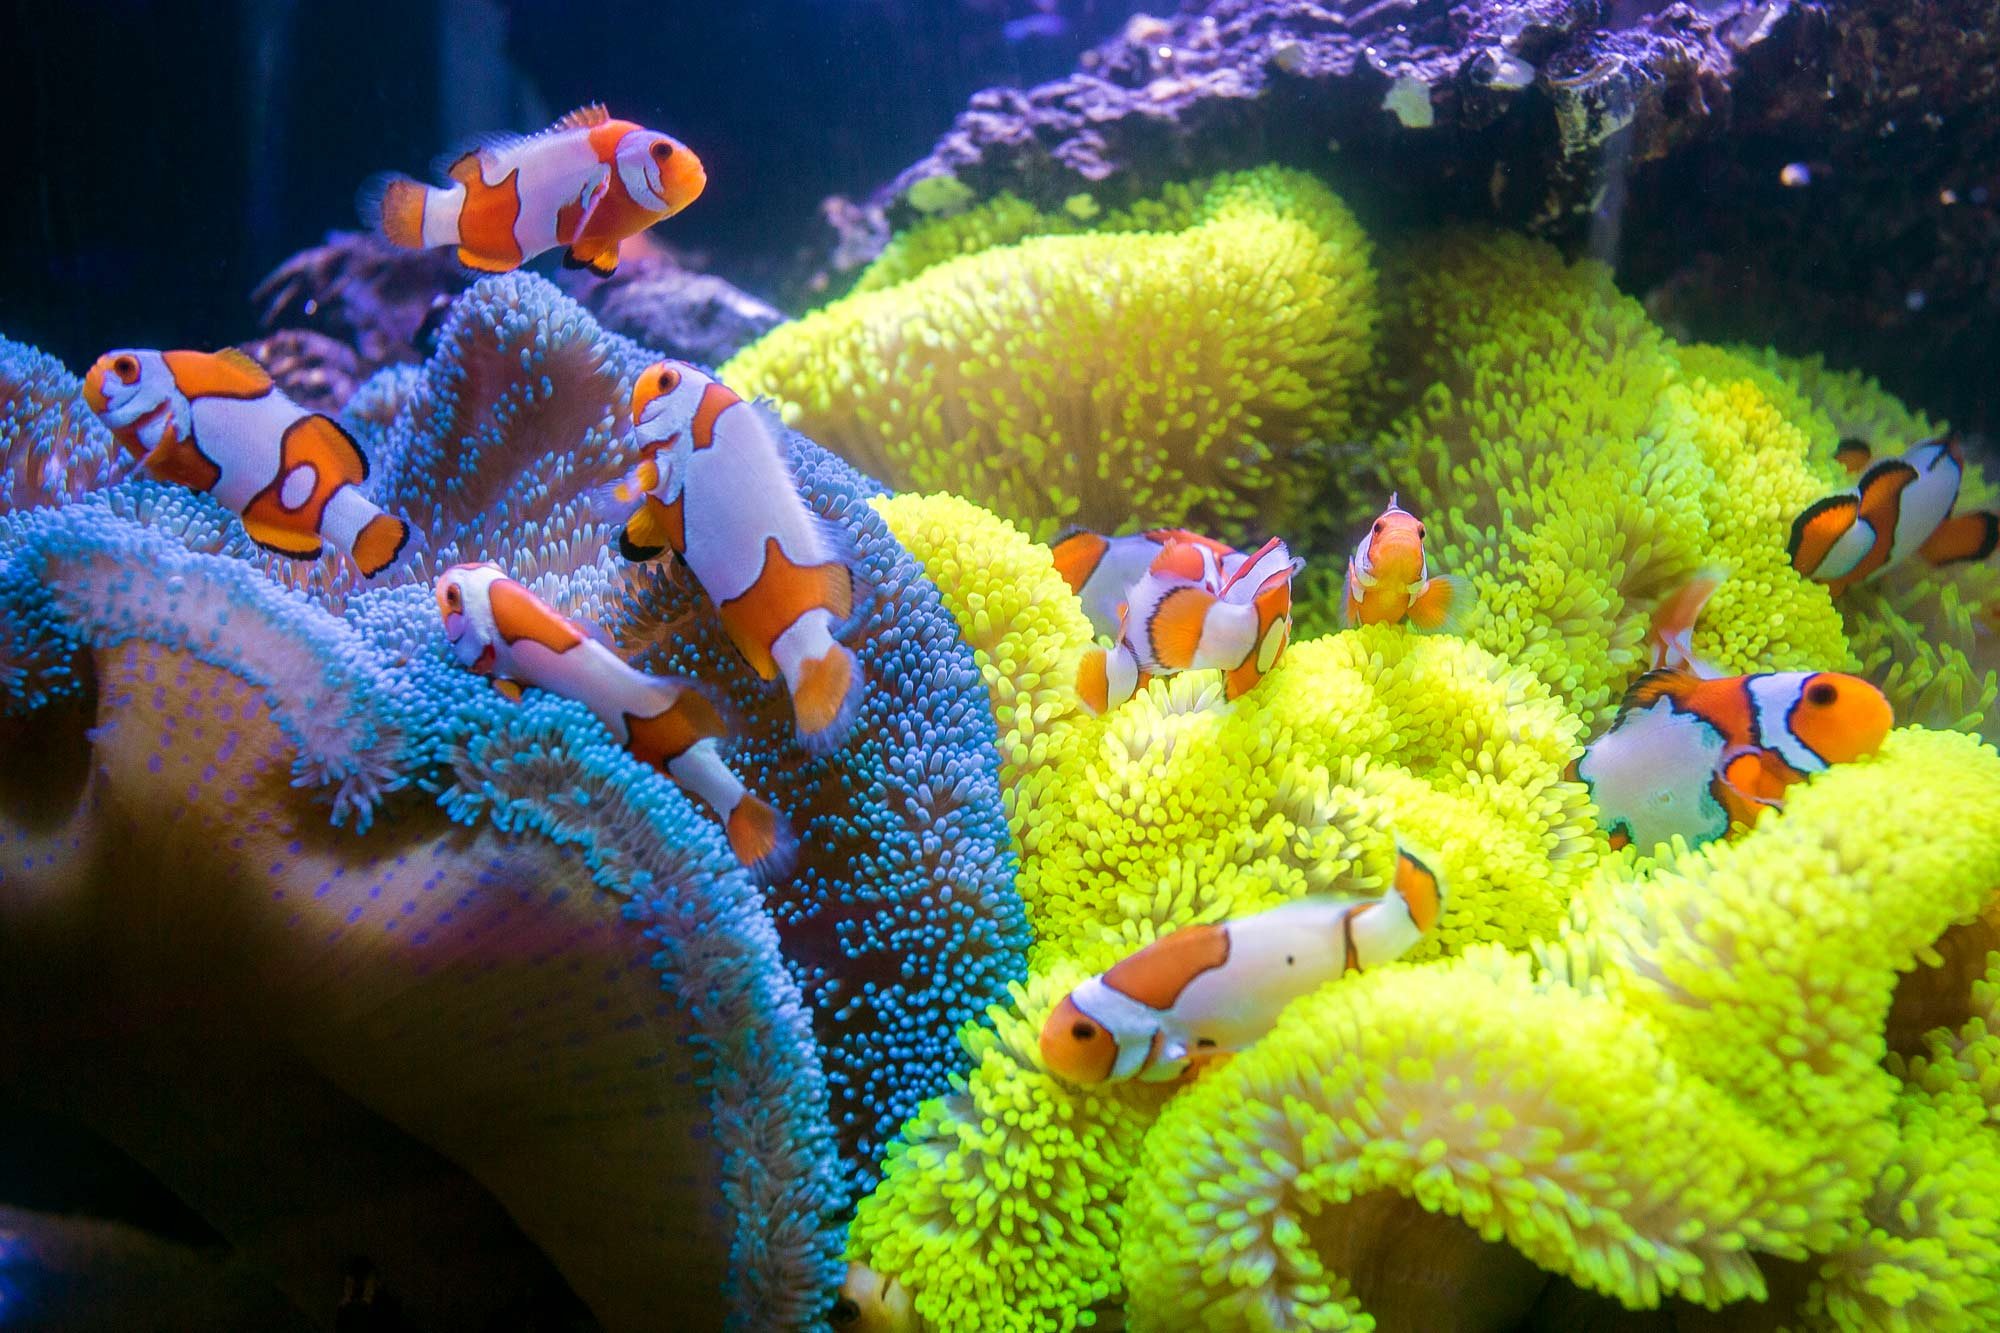 Reef, Sea, Amphiprion, Fish, Coral Reef